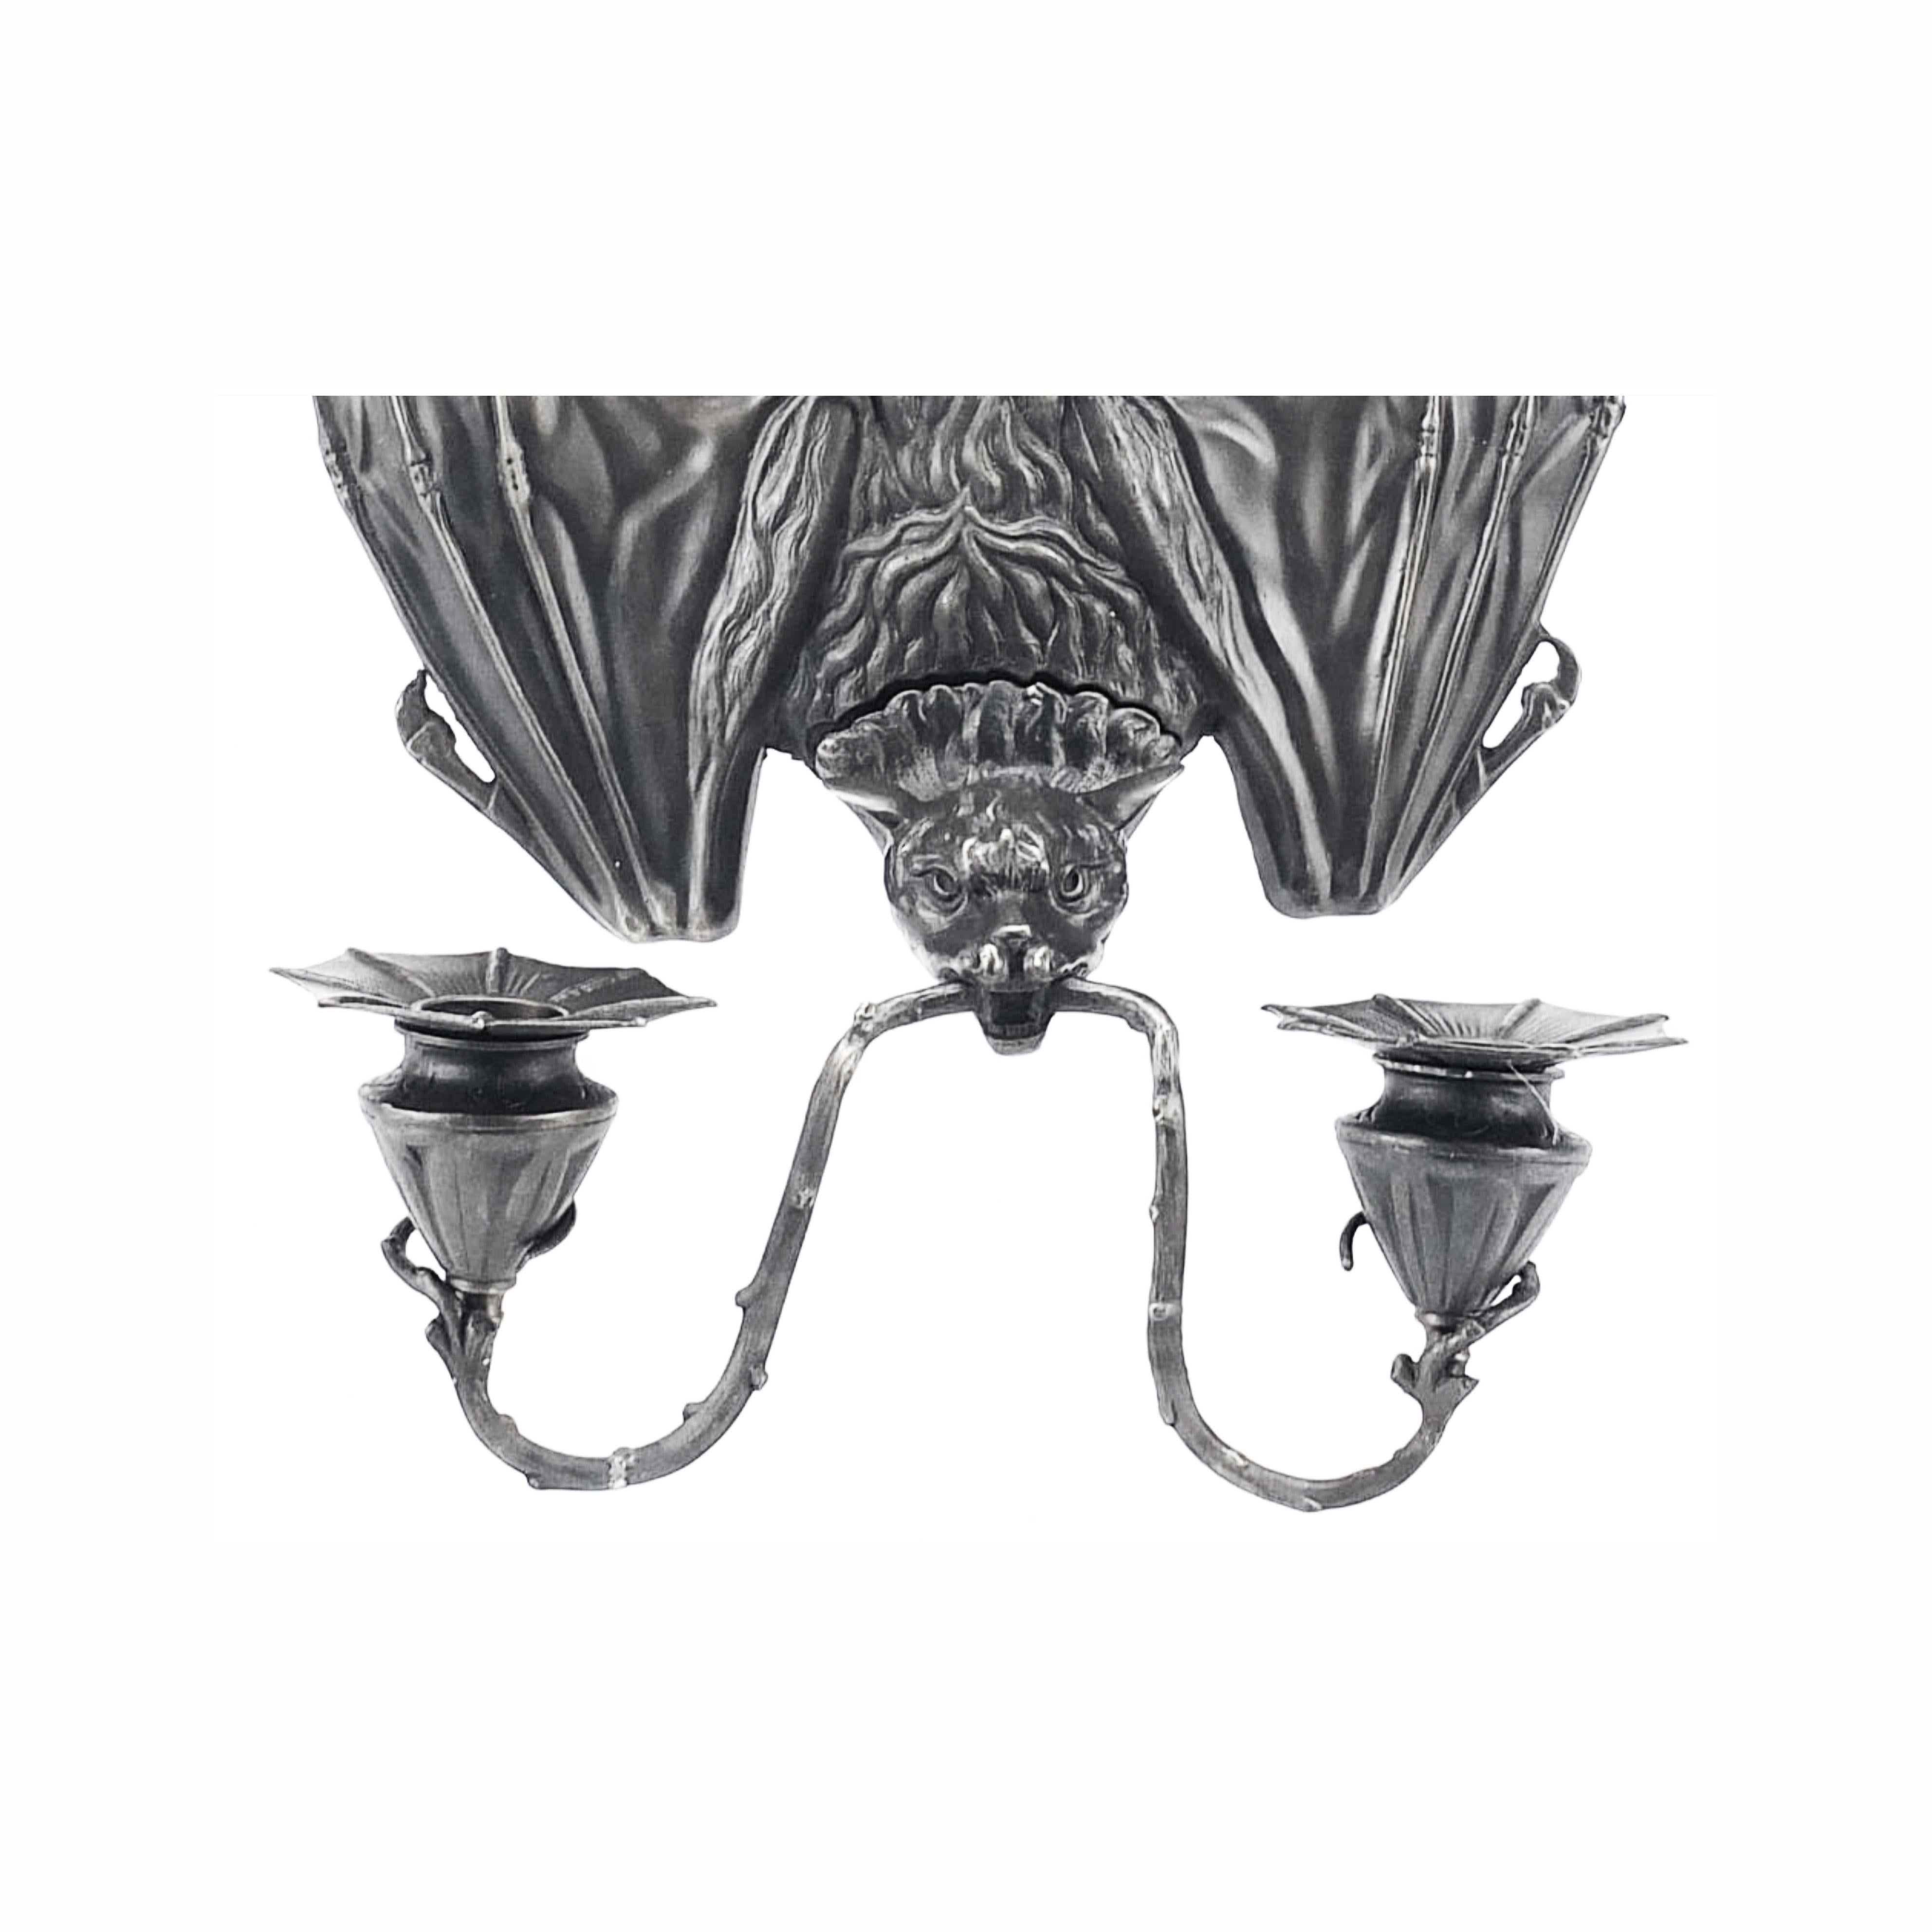 Silverplate wall light in the shape of a bat with two supports for candles. The bat was a very popular animal during the late 19th century and really inspired all Art Nouveau designers, most specifically some jewel designers such as Lalique who